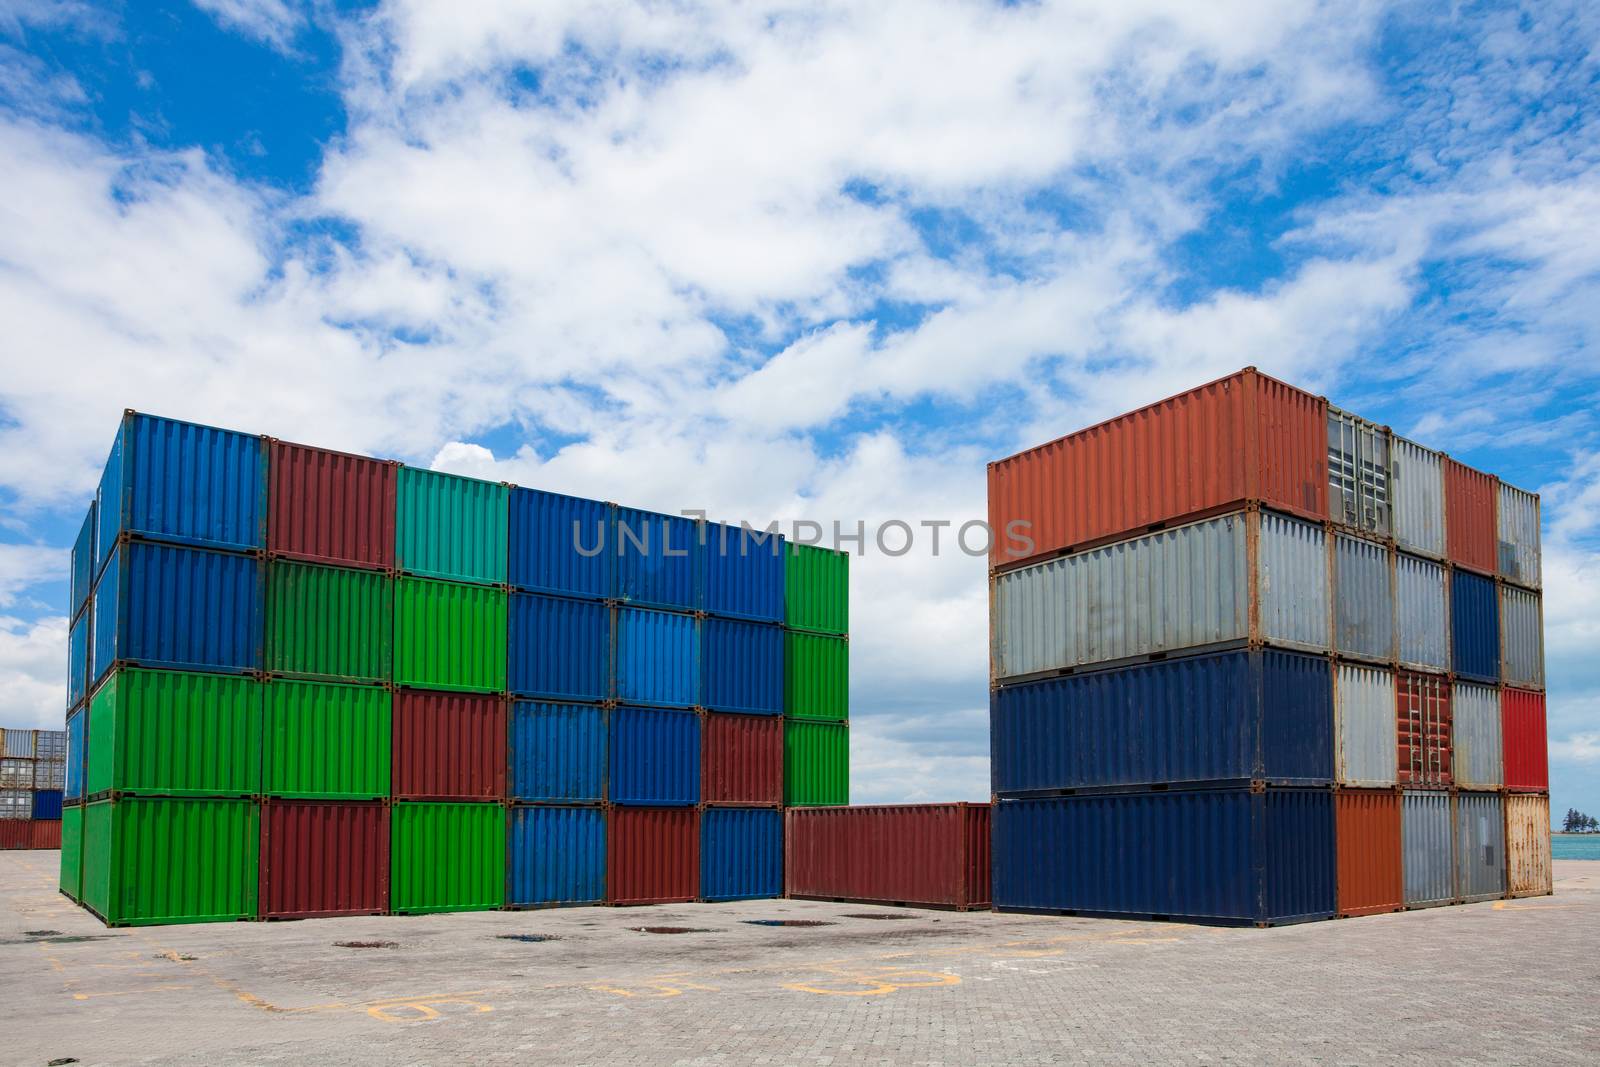 container box loading at yardContainer handling. Container truck picking up container at yard. Port logistics container yard operation.